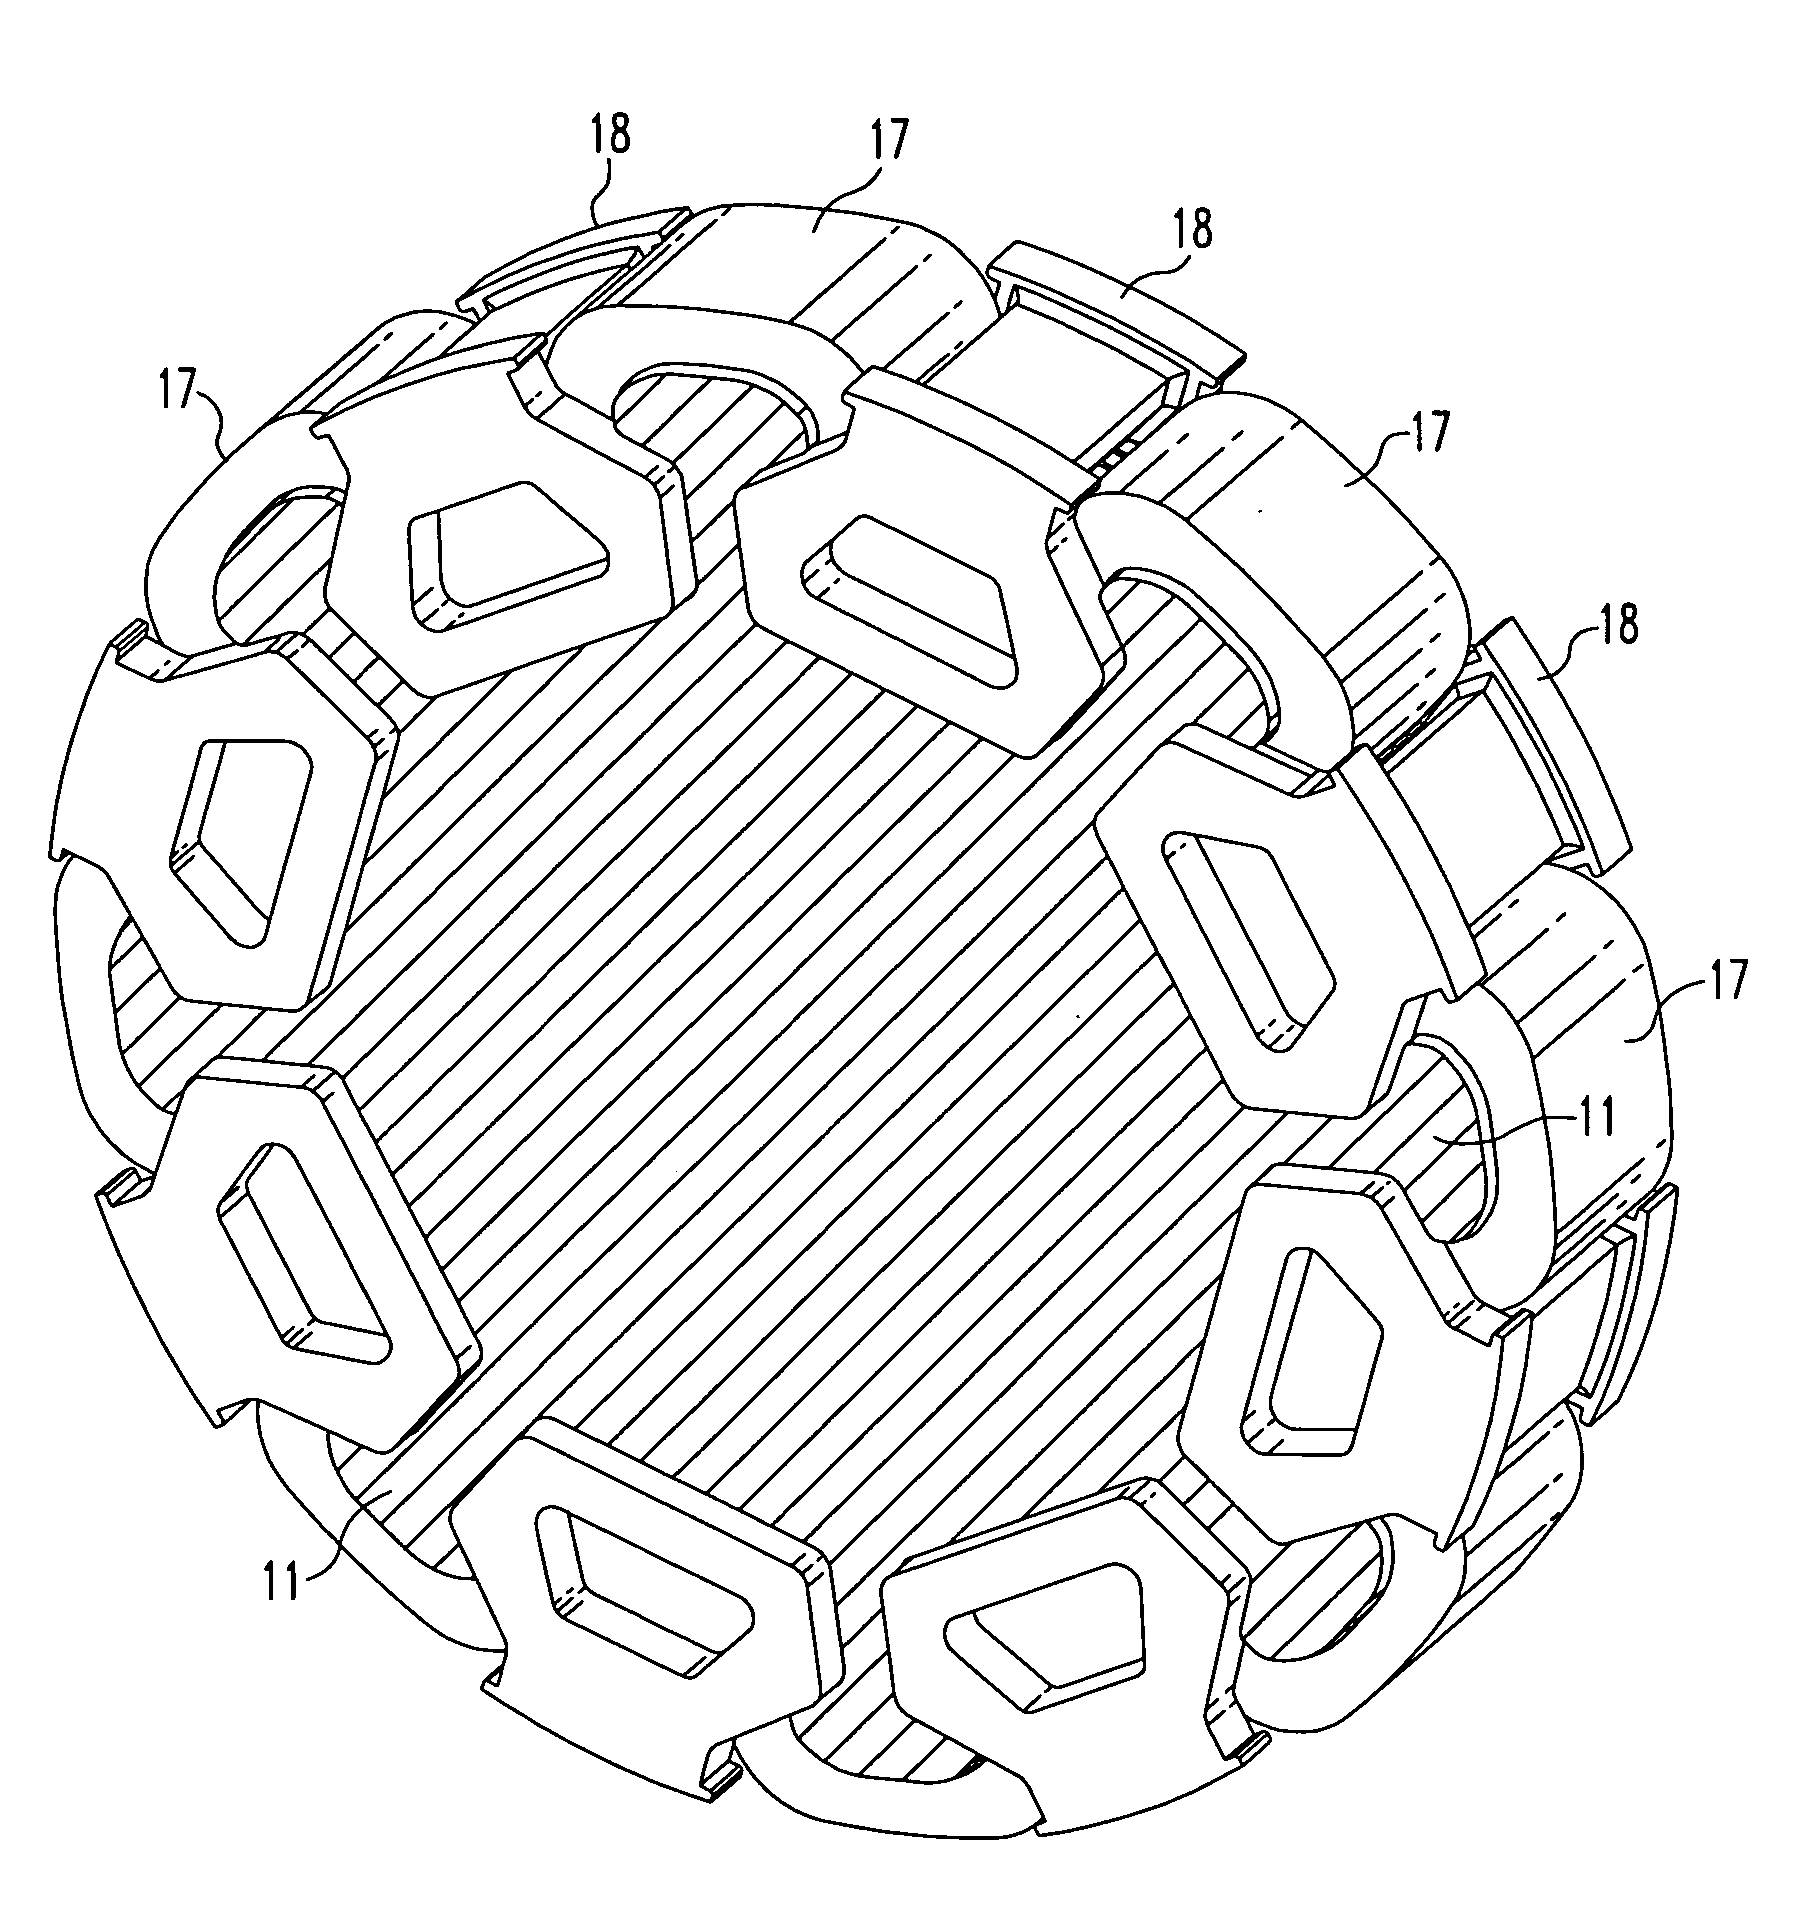 Permanent magnet rotor and magnet cradle